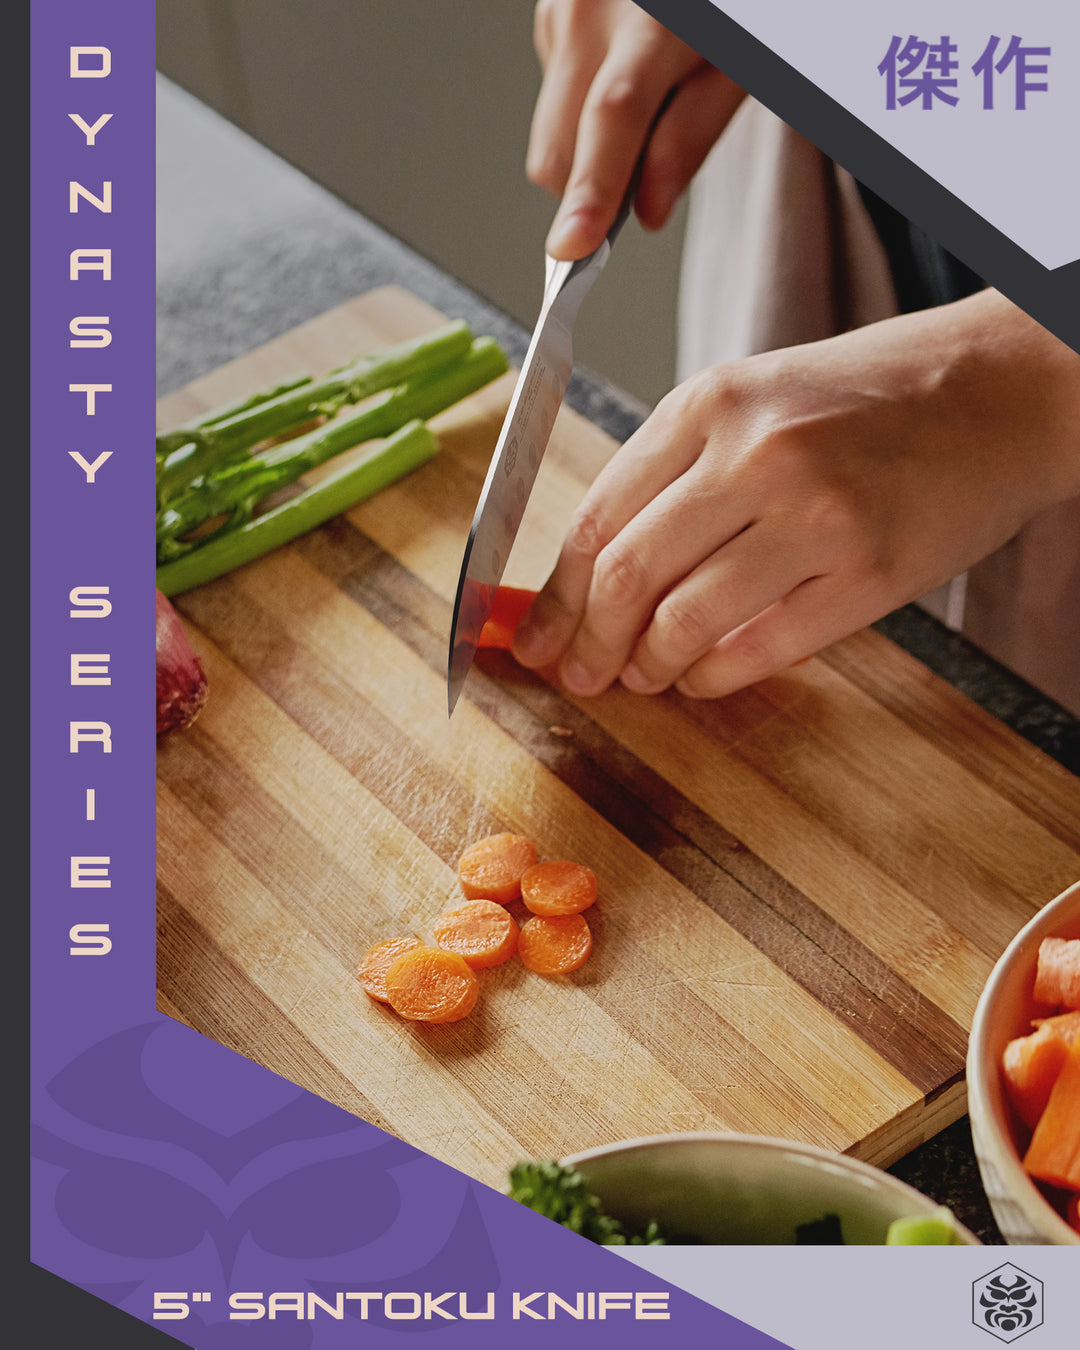 A woman slices a carrot with the Dynasty 5" Santoku Knife